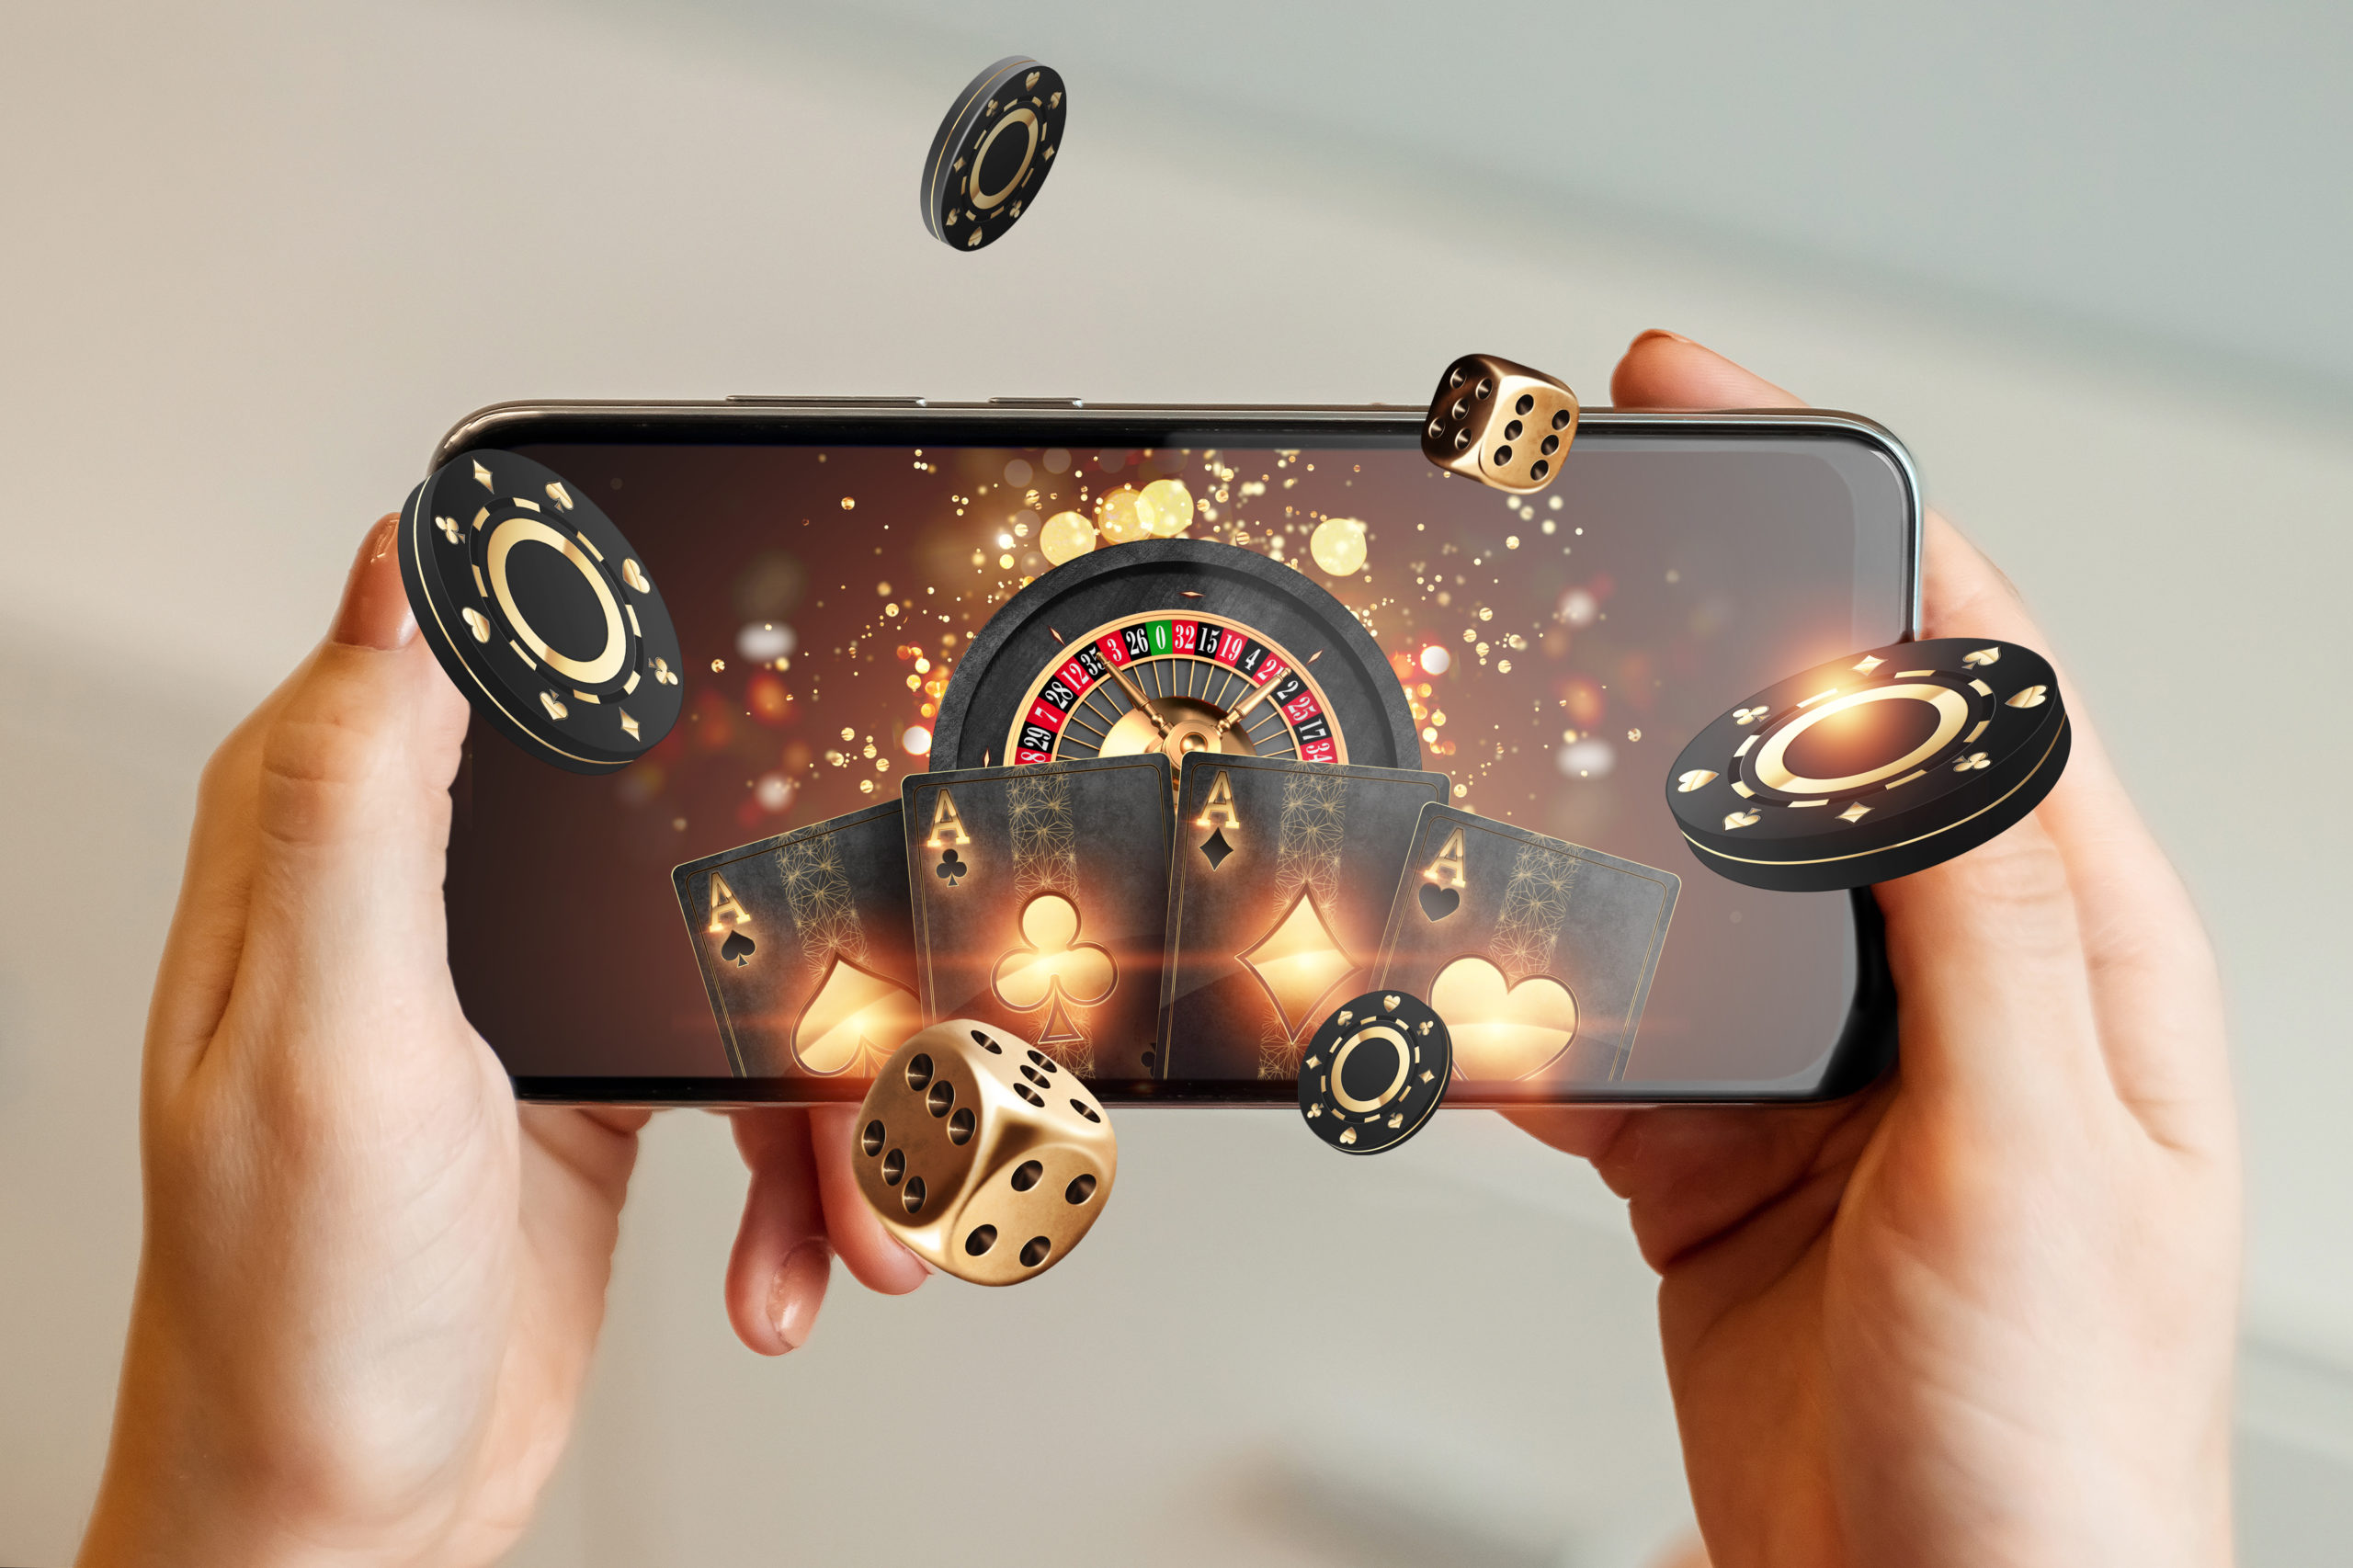 Top Mobile Instant Win Gaming Casino